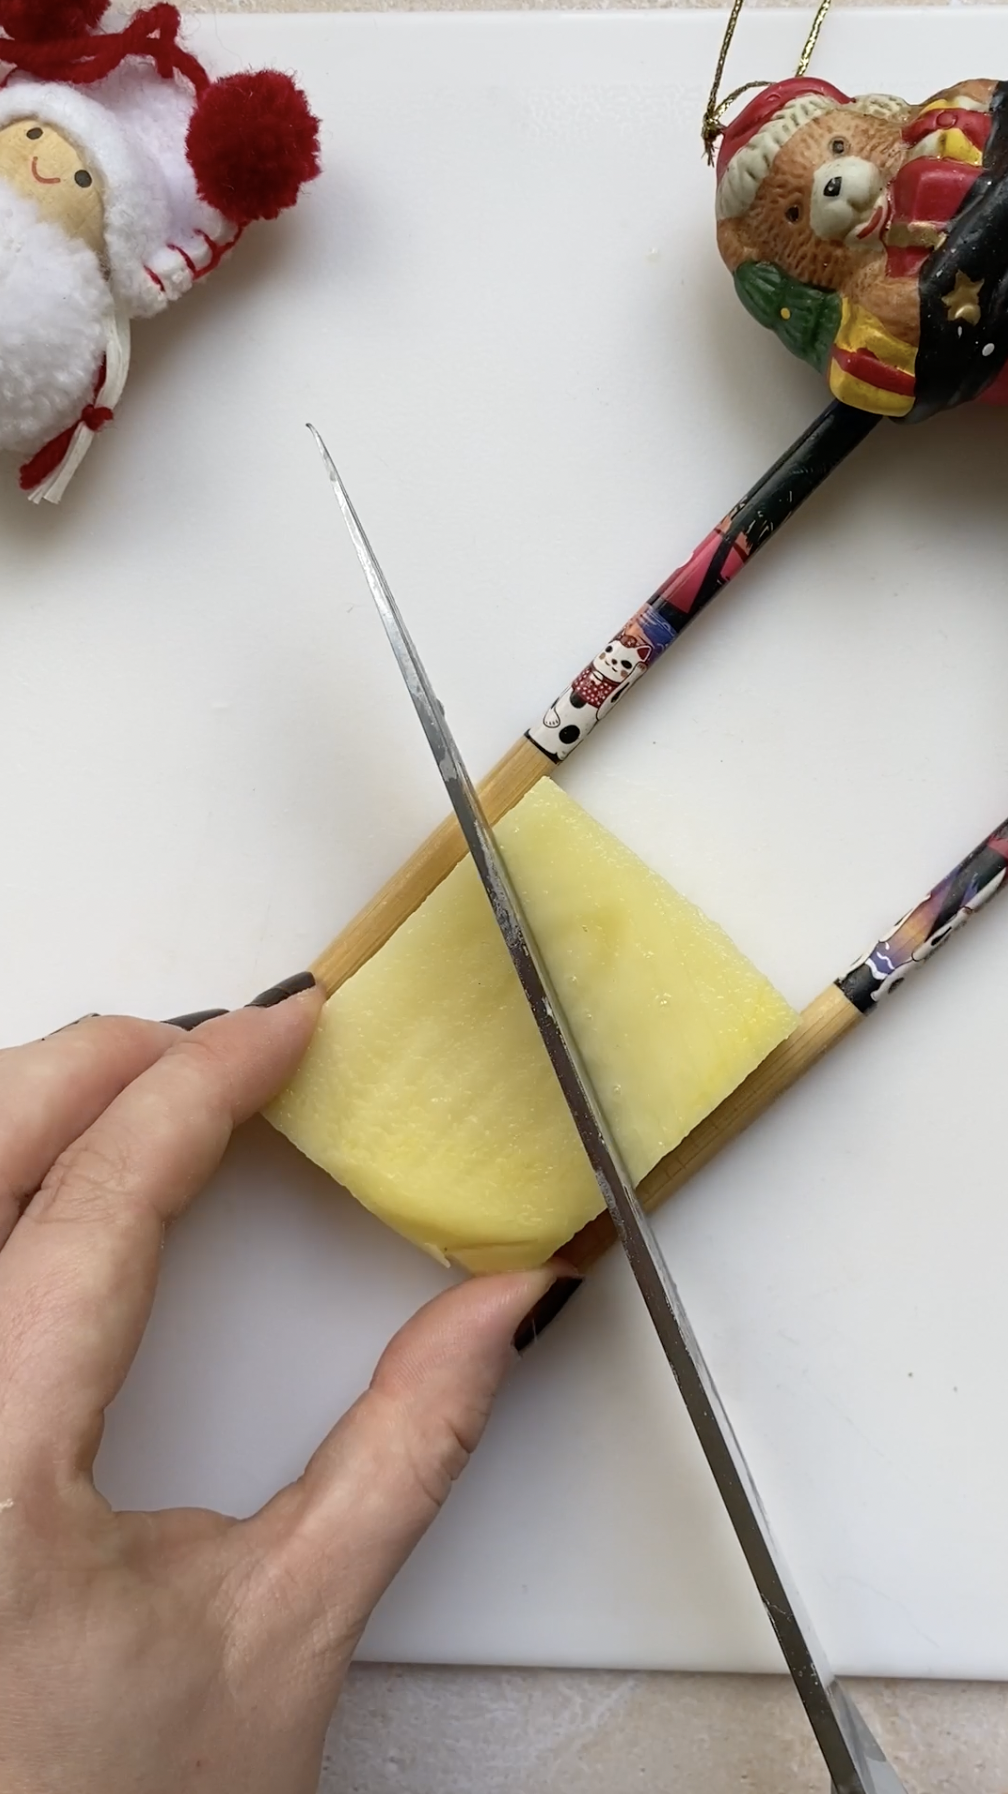 A hand holding a knife, cutting a potato in diagonal lines.